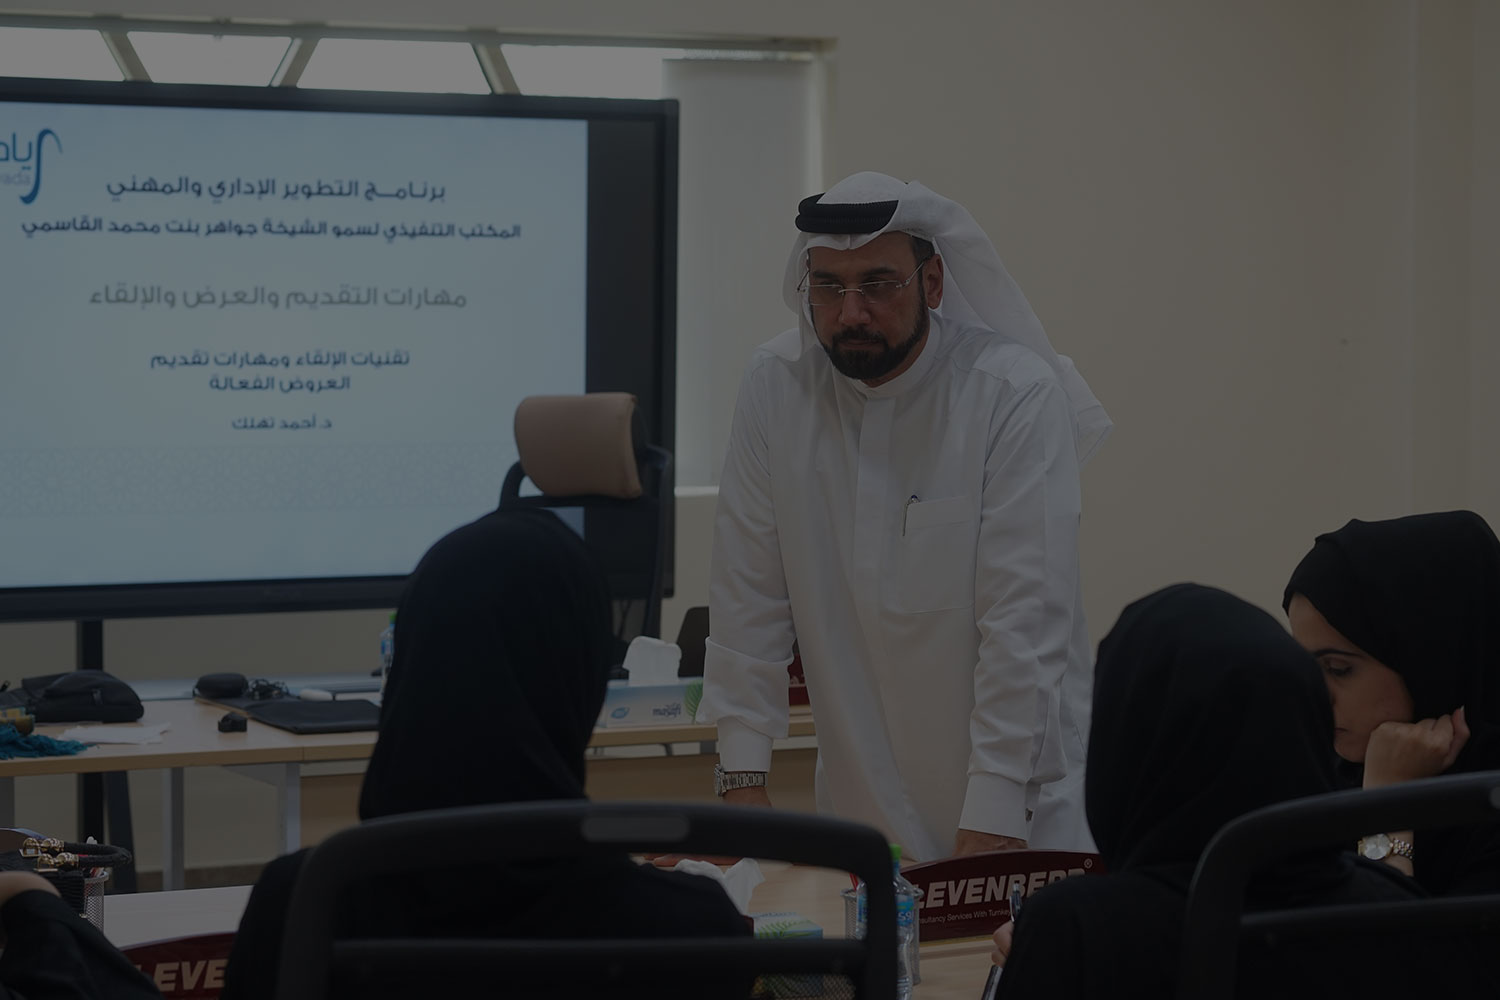 Employees which contributes in serving Sharjah community